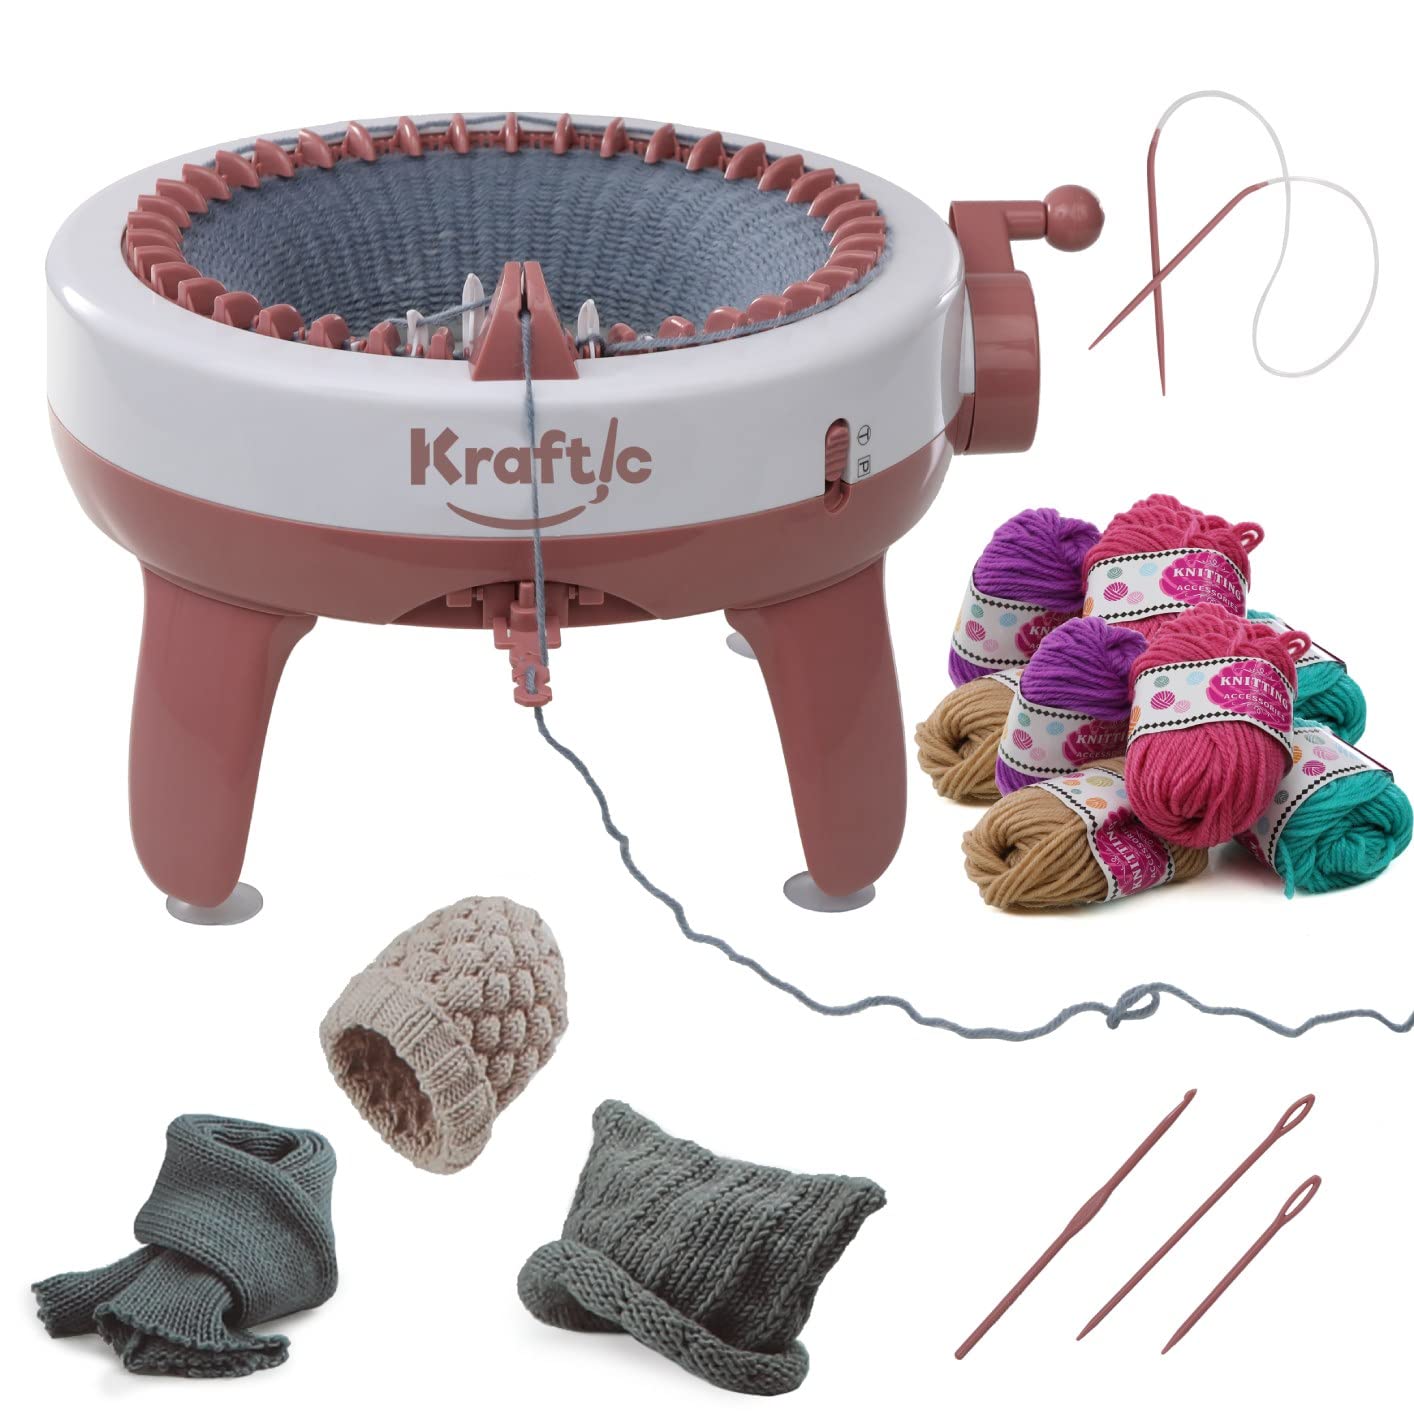 Kraftic Knitting Craft Machine, 40 Needle Knitting Loom Board with Flat and  Round Weaving Options for Kids and Adults. Complete kit Comes with 10 Balls  of Yarn and a Knitting Needle